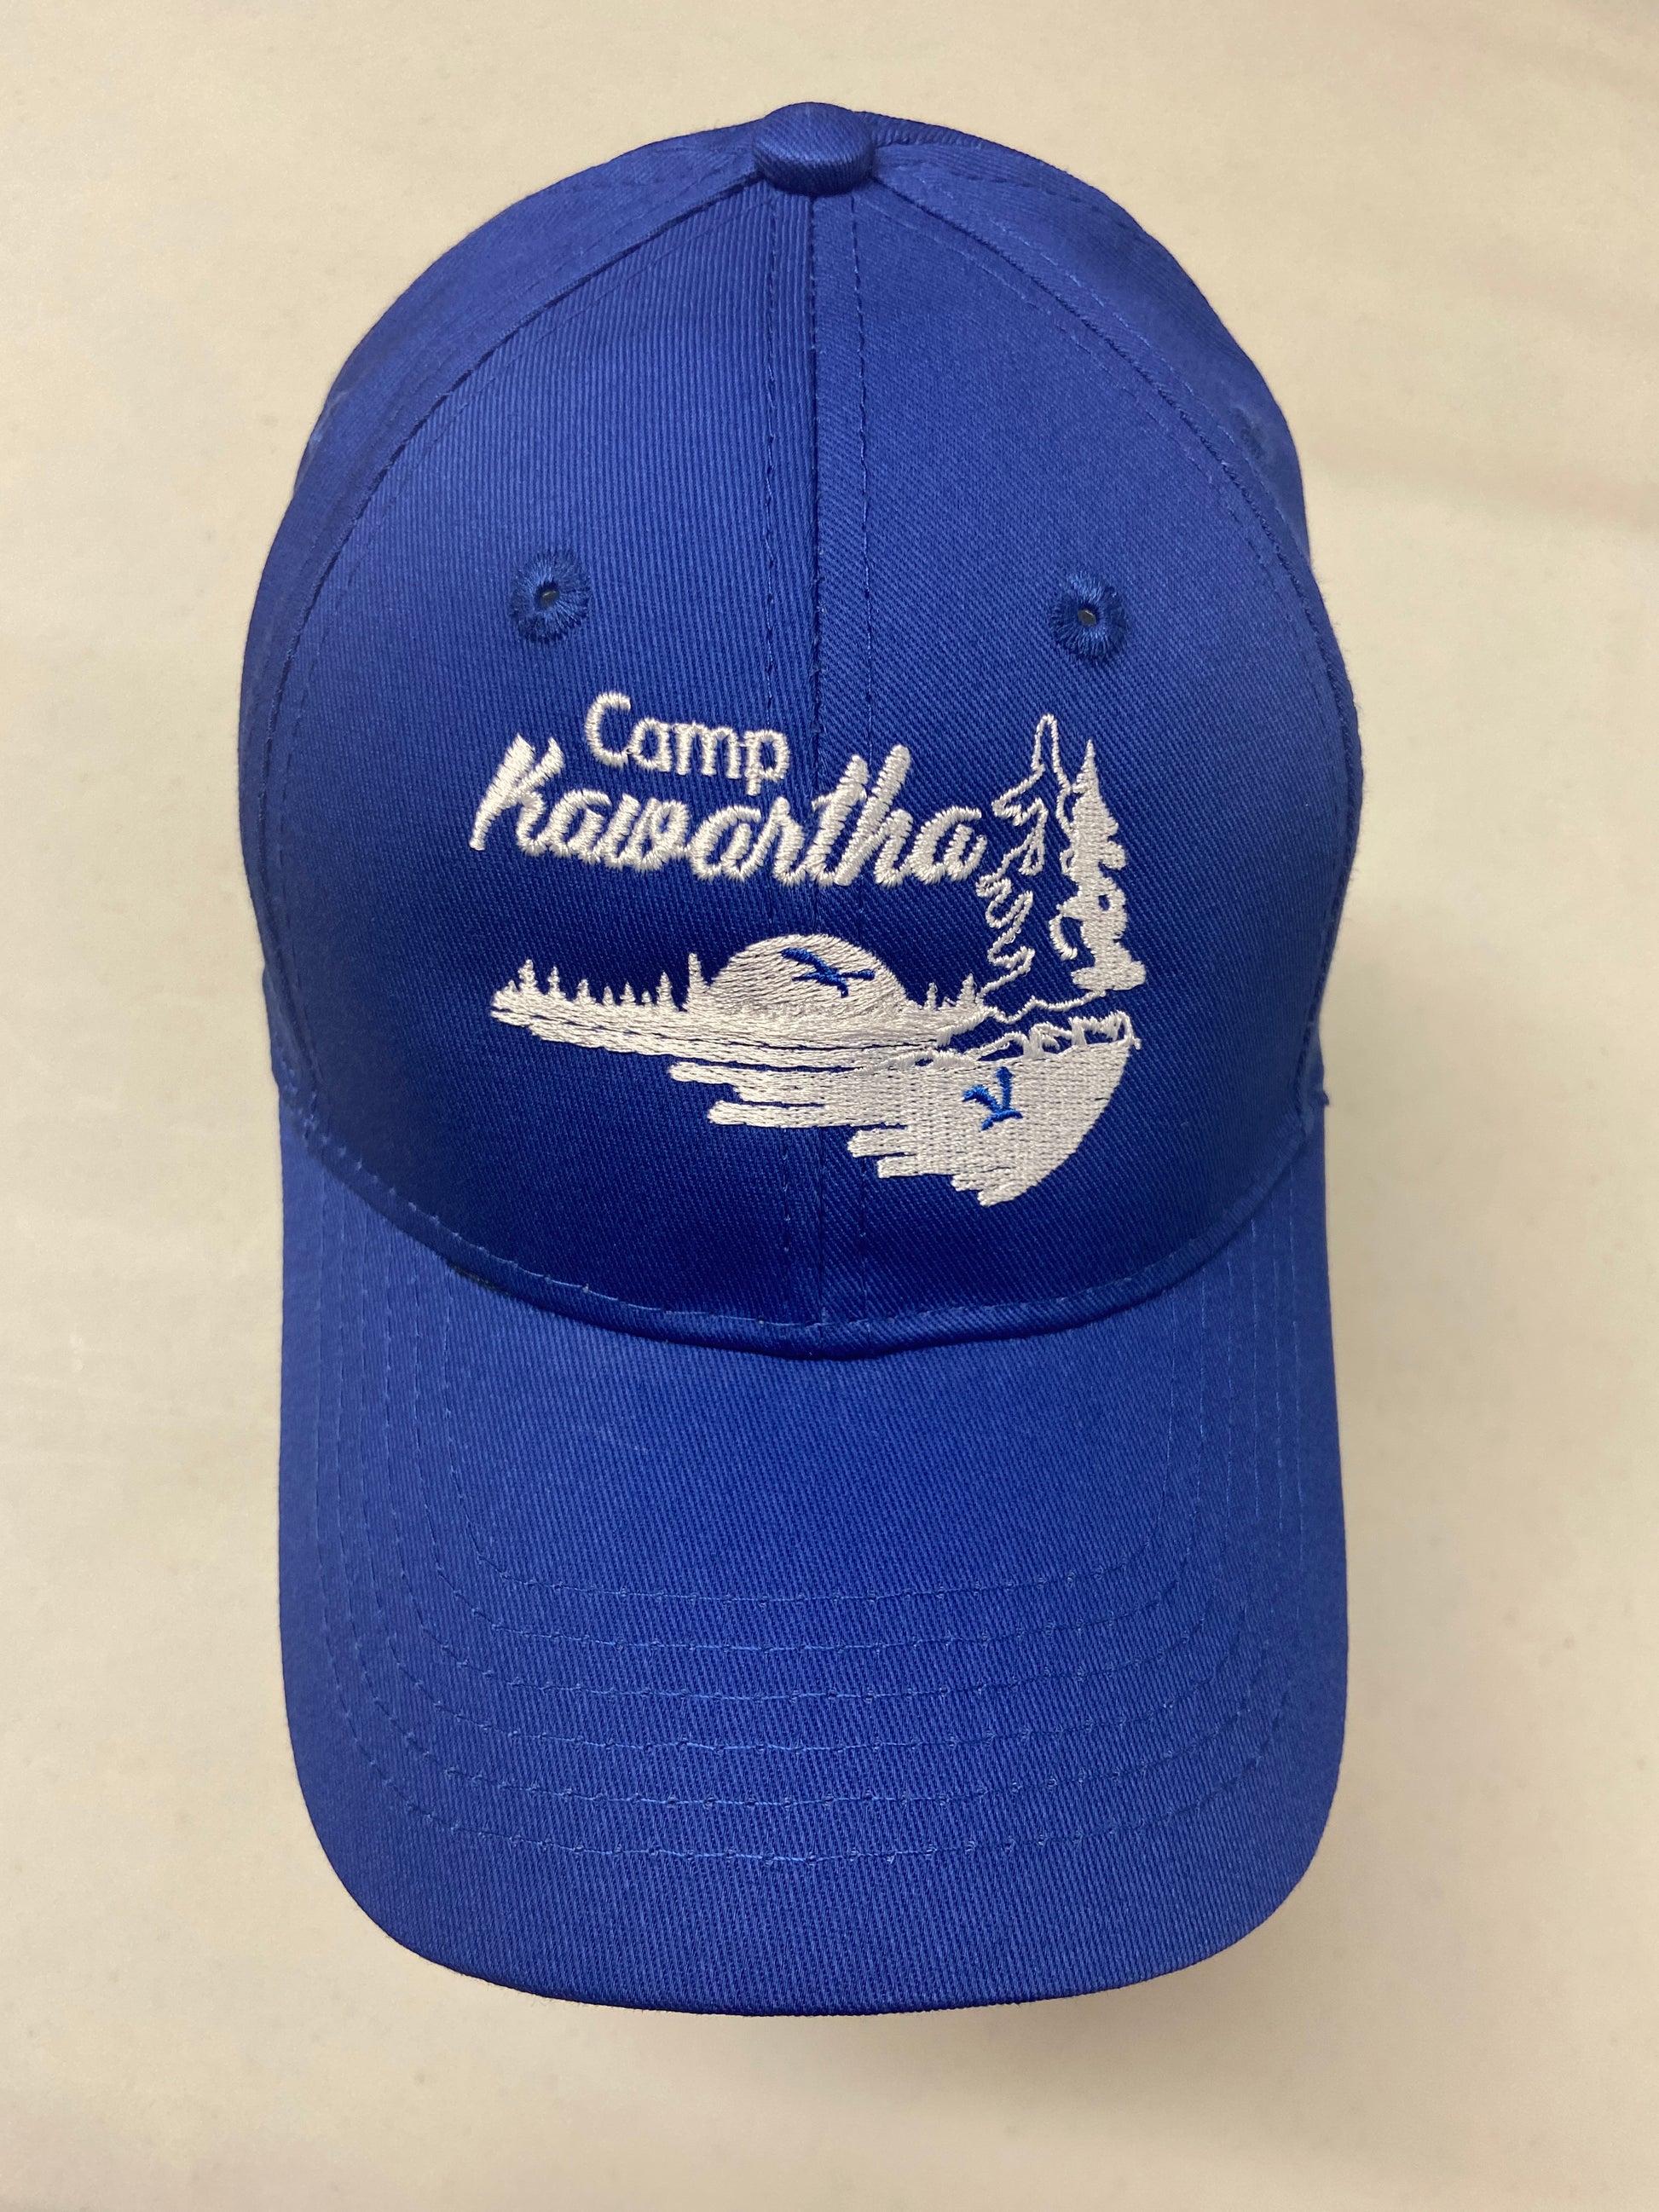 Youth-sized structured ball cap in royal blue. 